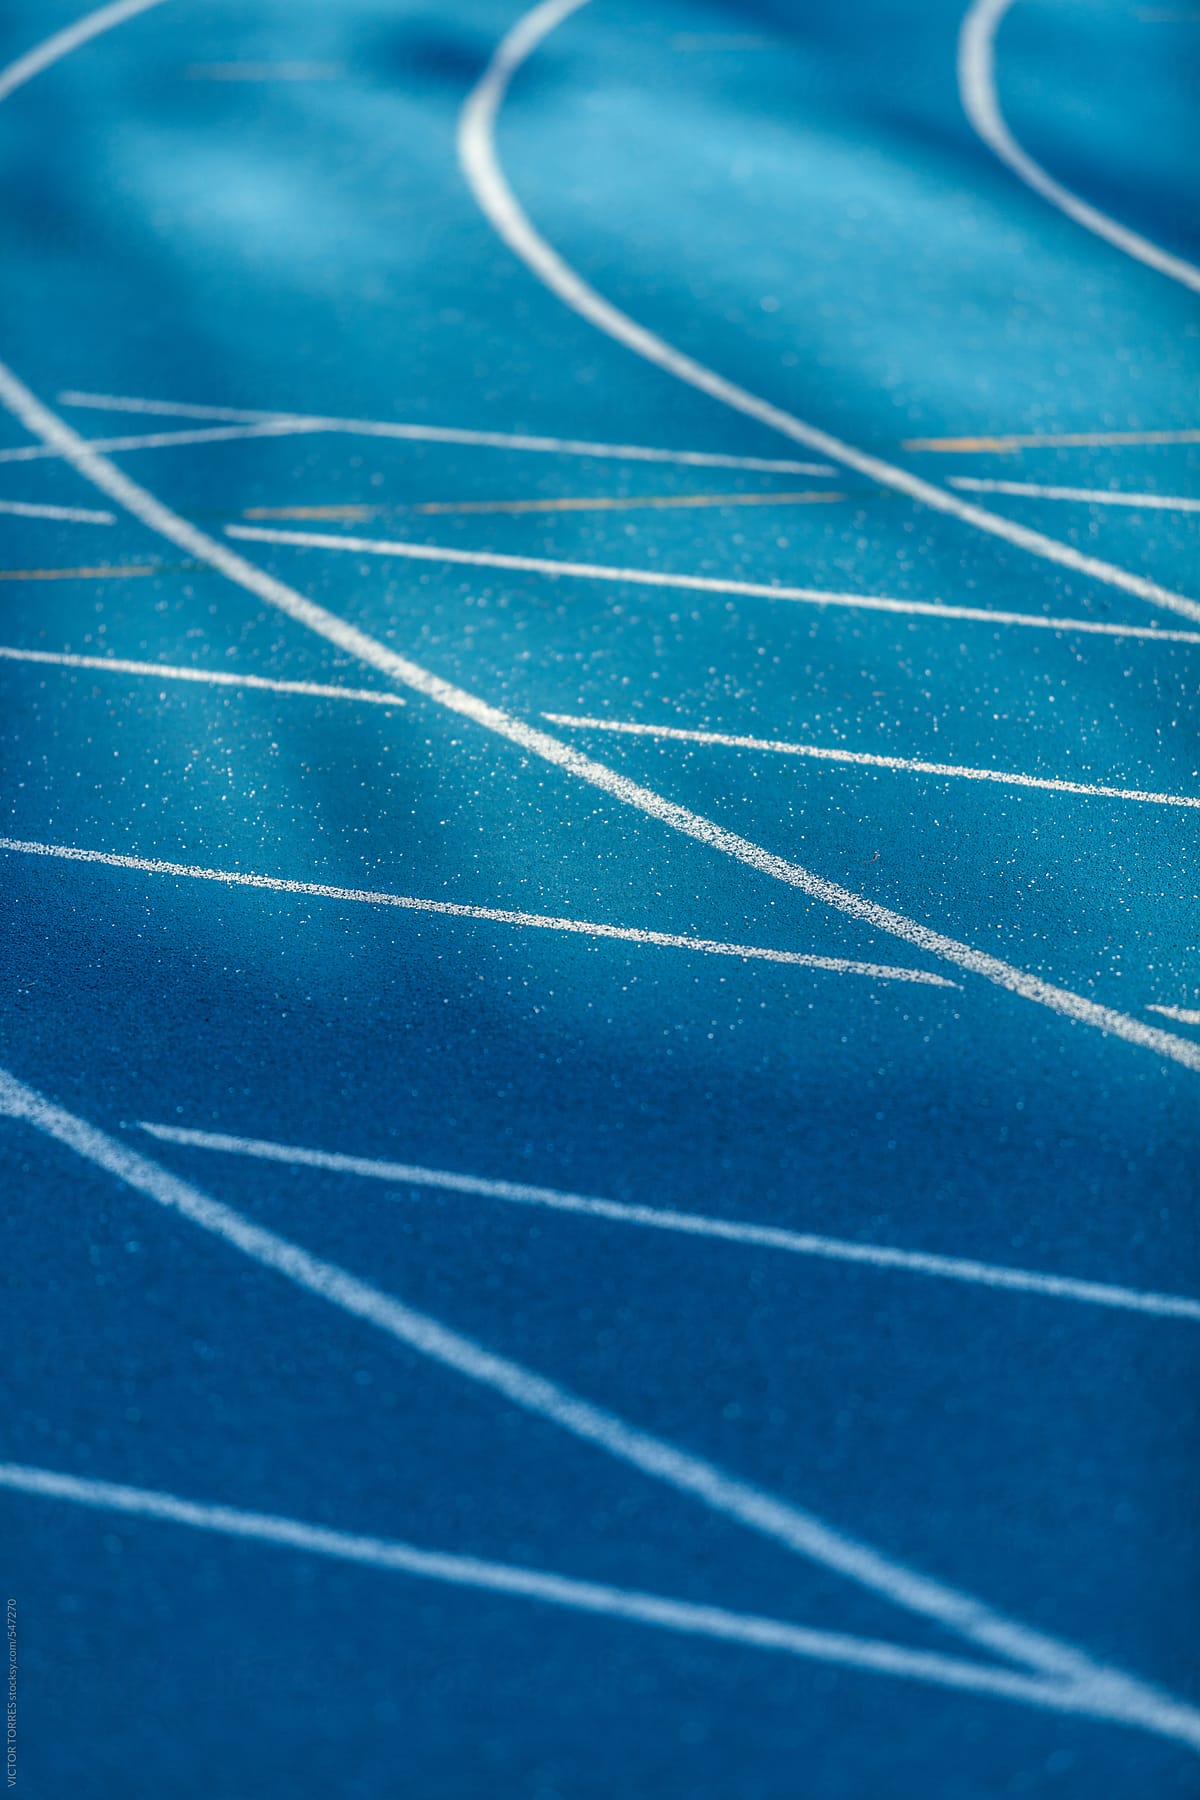 Background of a Blue Athletics Track